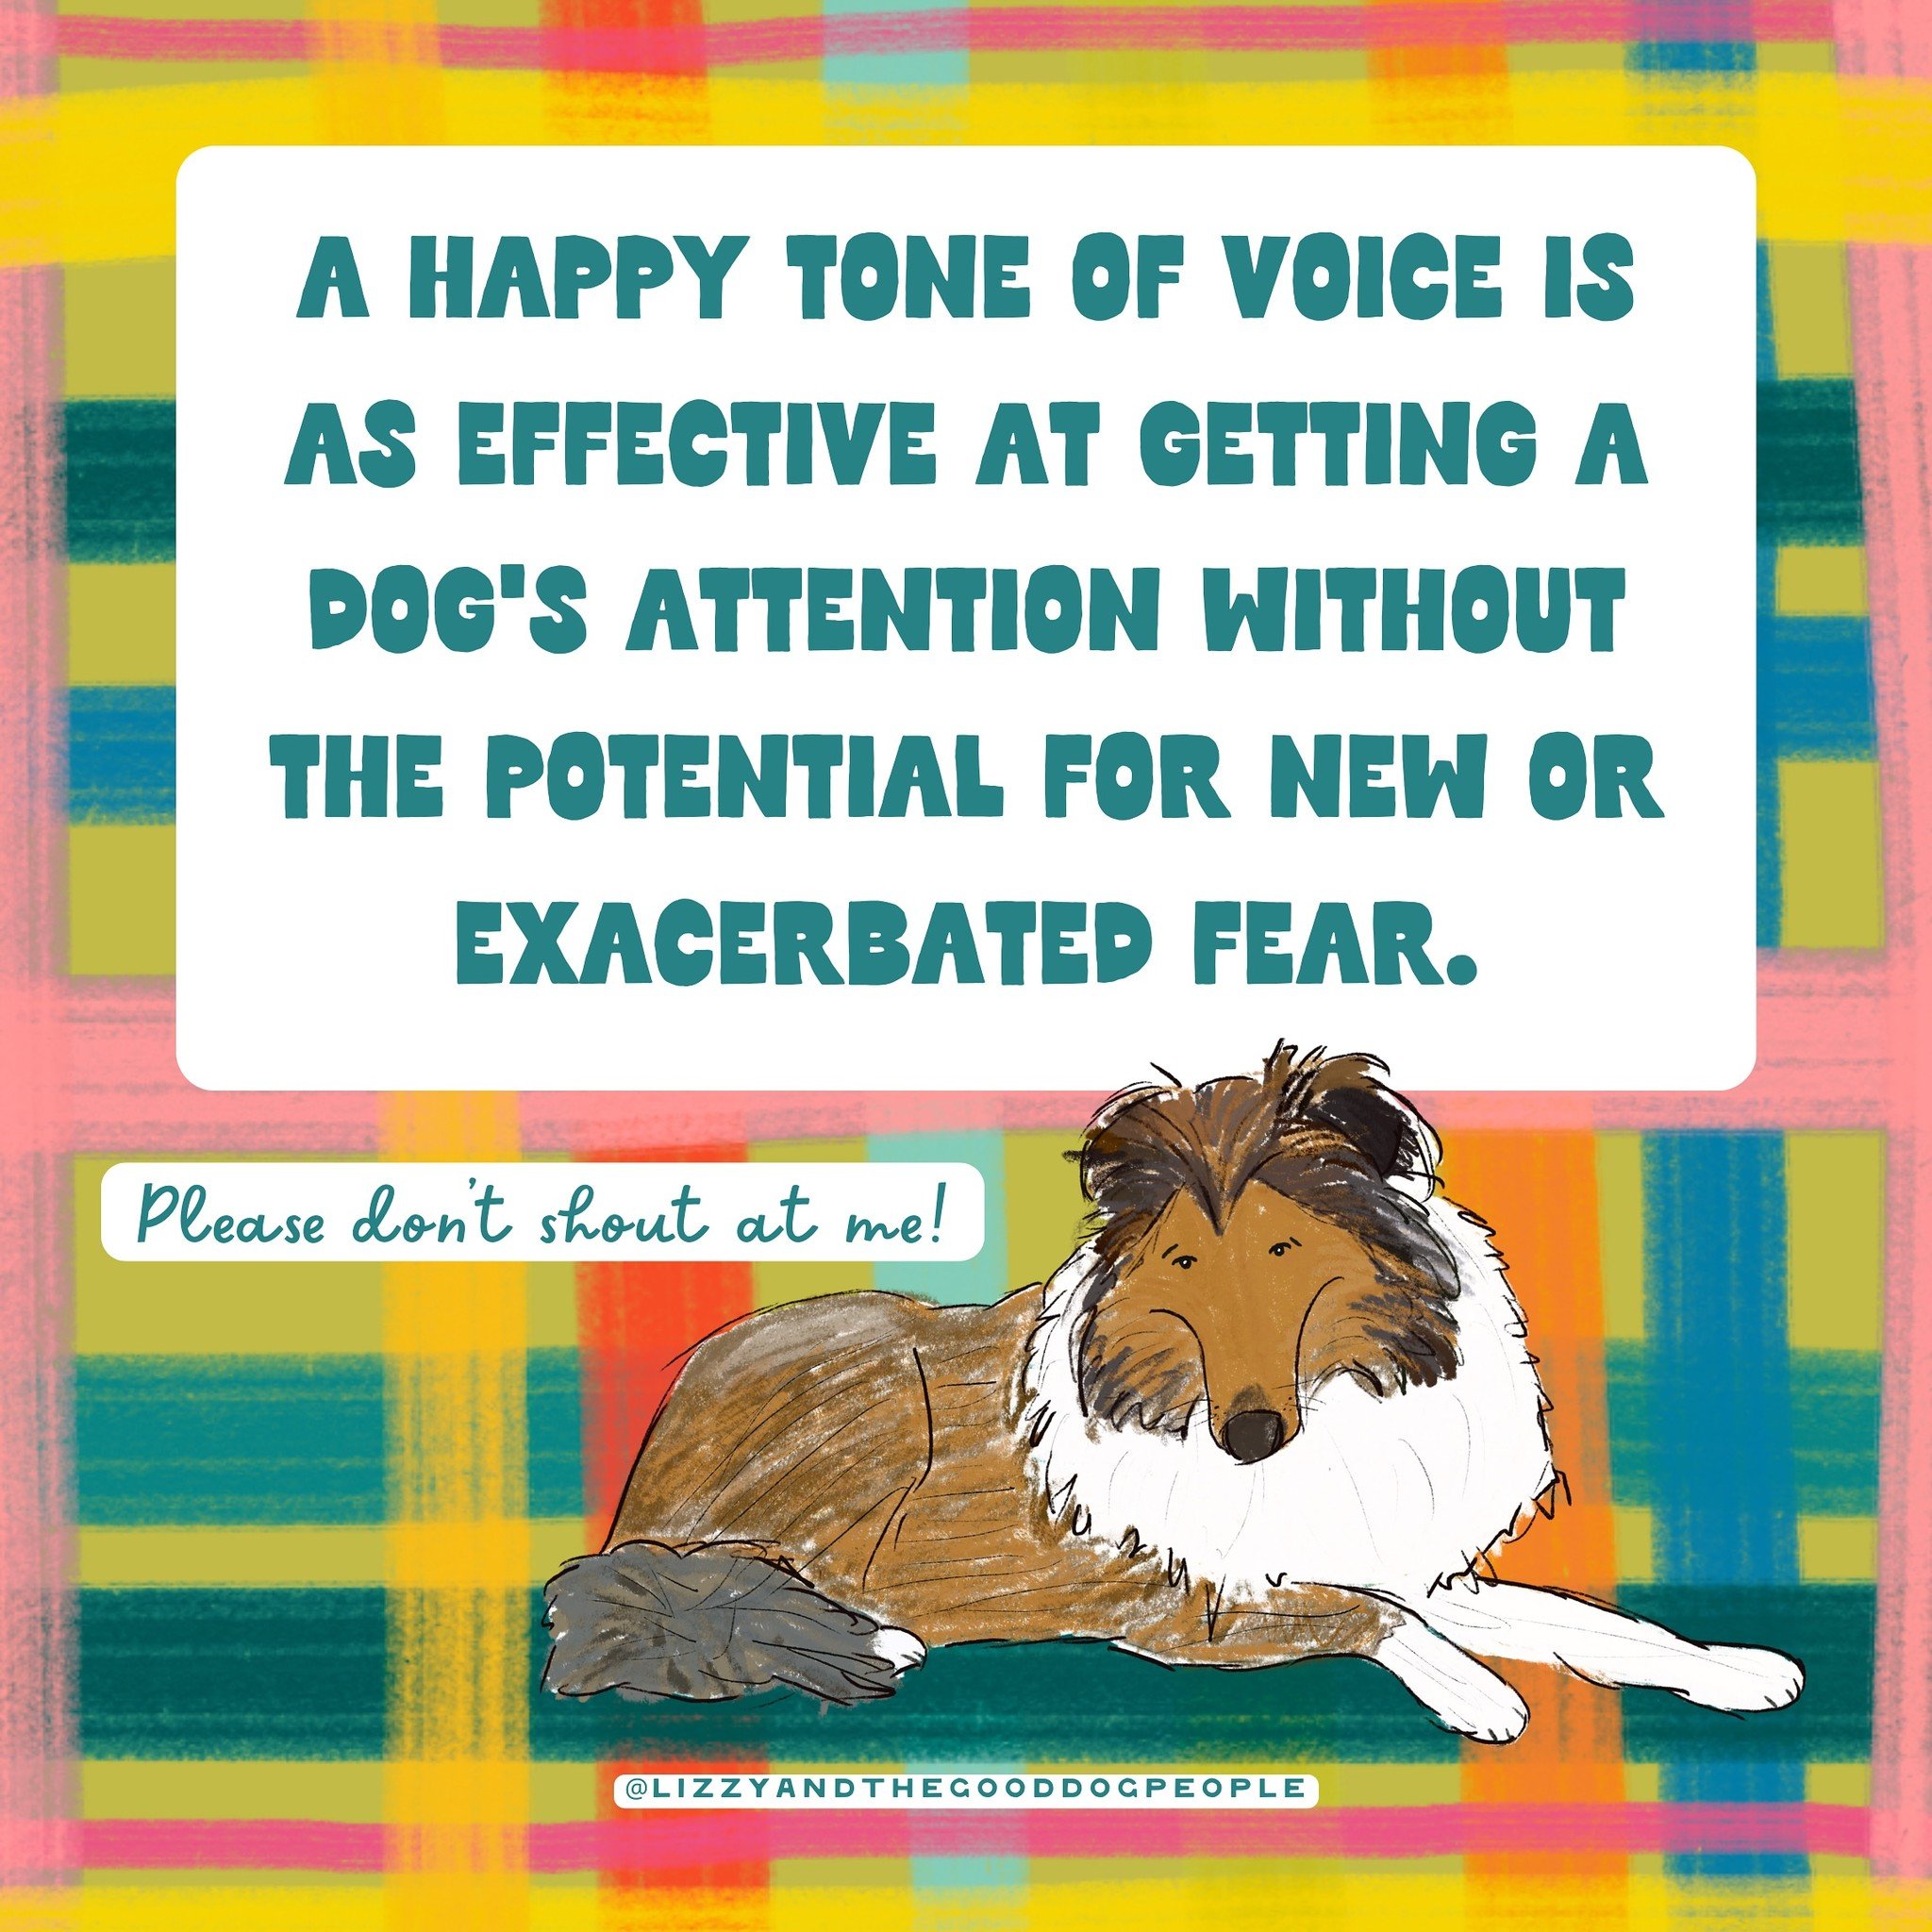 My clients are always so happy to hear that a happy tone of voice is as effective at getting a dog&rsquo;s attention without the potential for new or exacerbated fear.

#dogtrainer #dogs #dogsofinstagram #dog #shelterdog #rescuedog #love #kindness #c